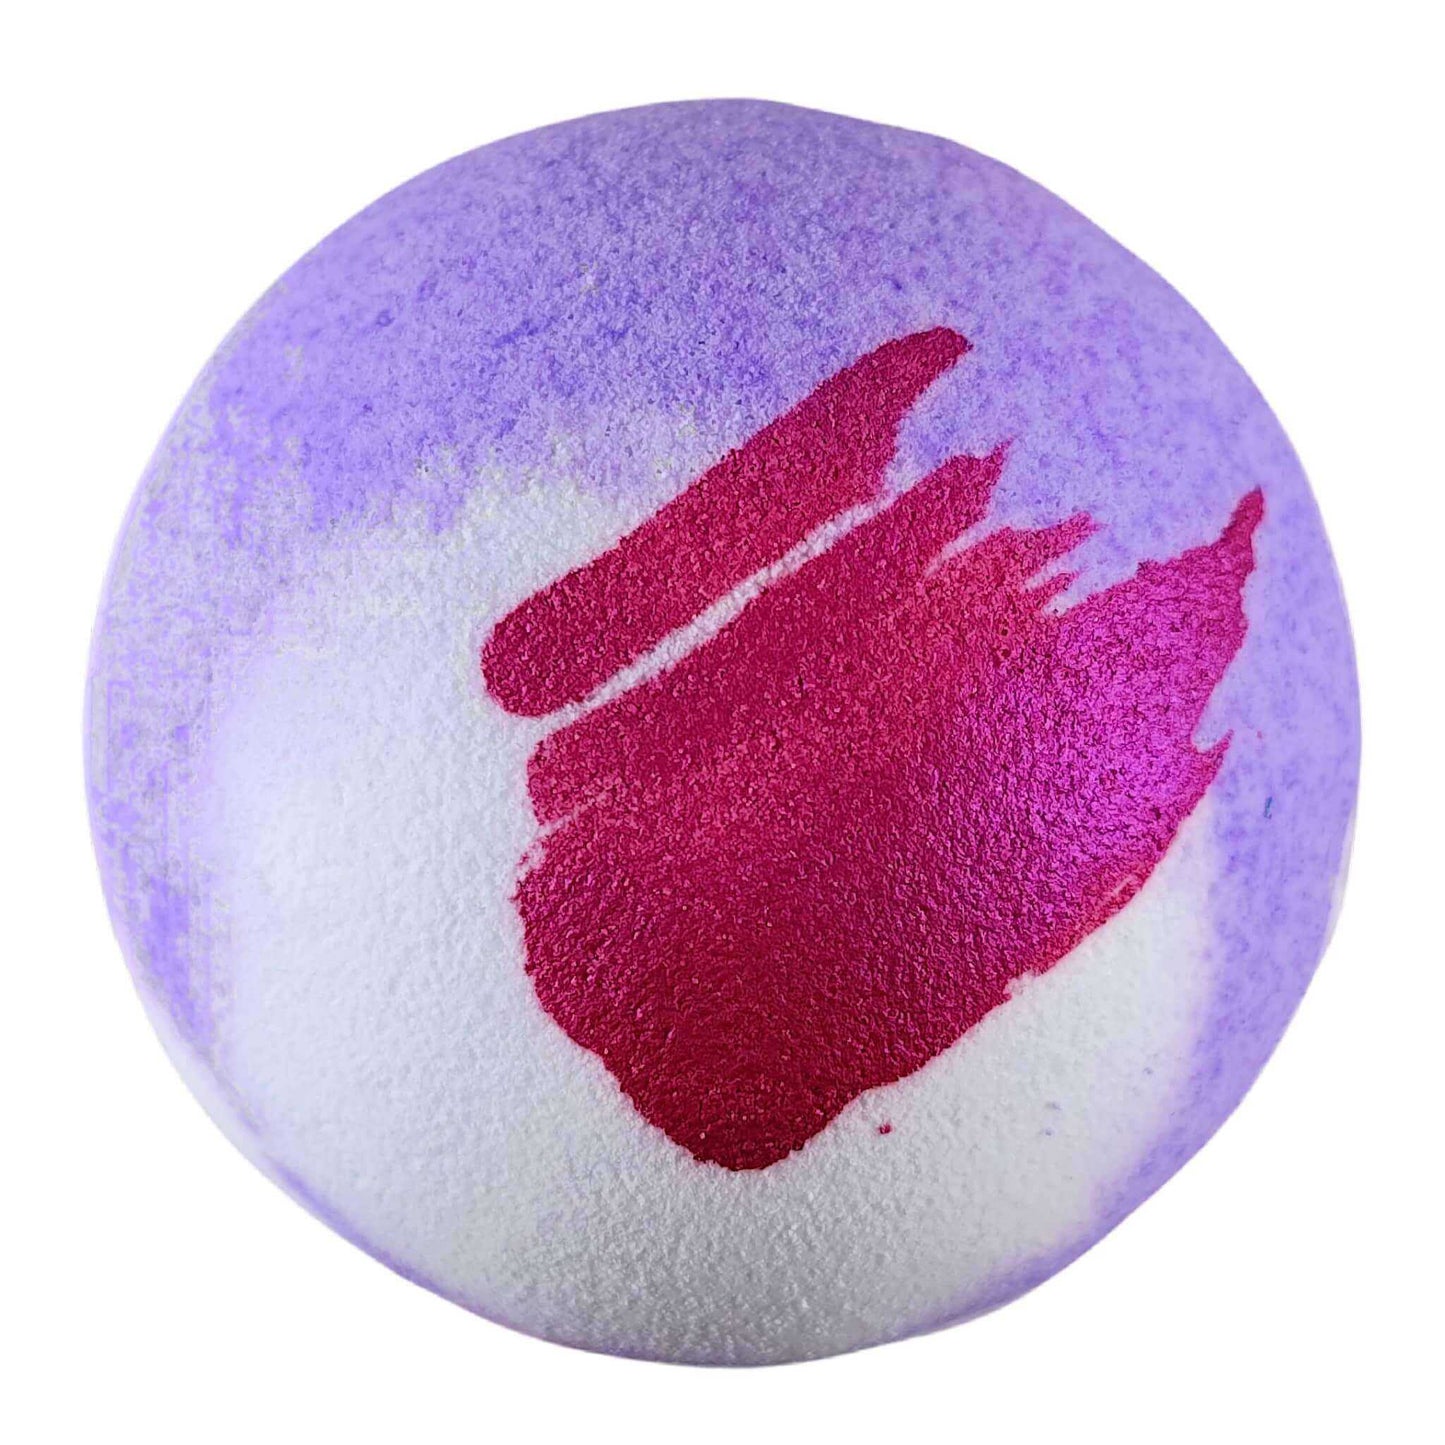 Lavender Luxury Fizzy Bath Bomb: Experience a new level of relaxation and rejuvenation in every bath time.